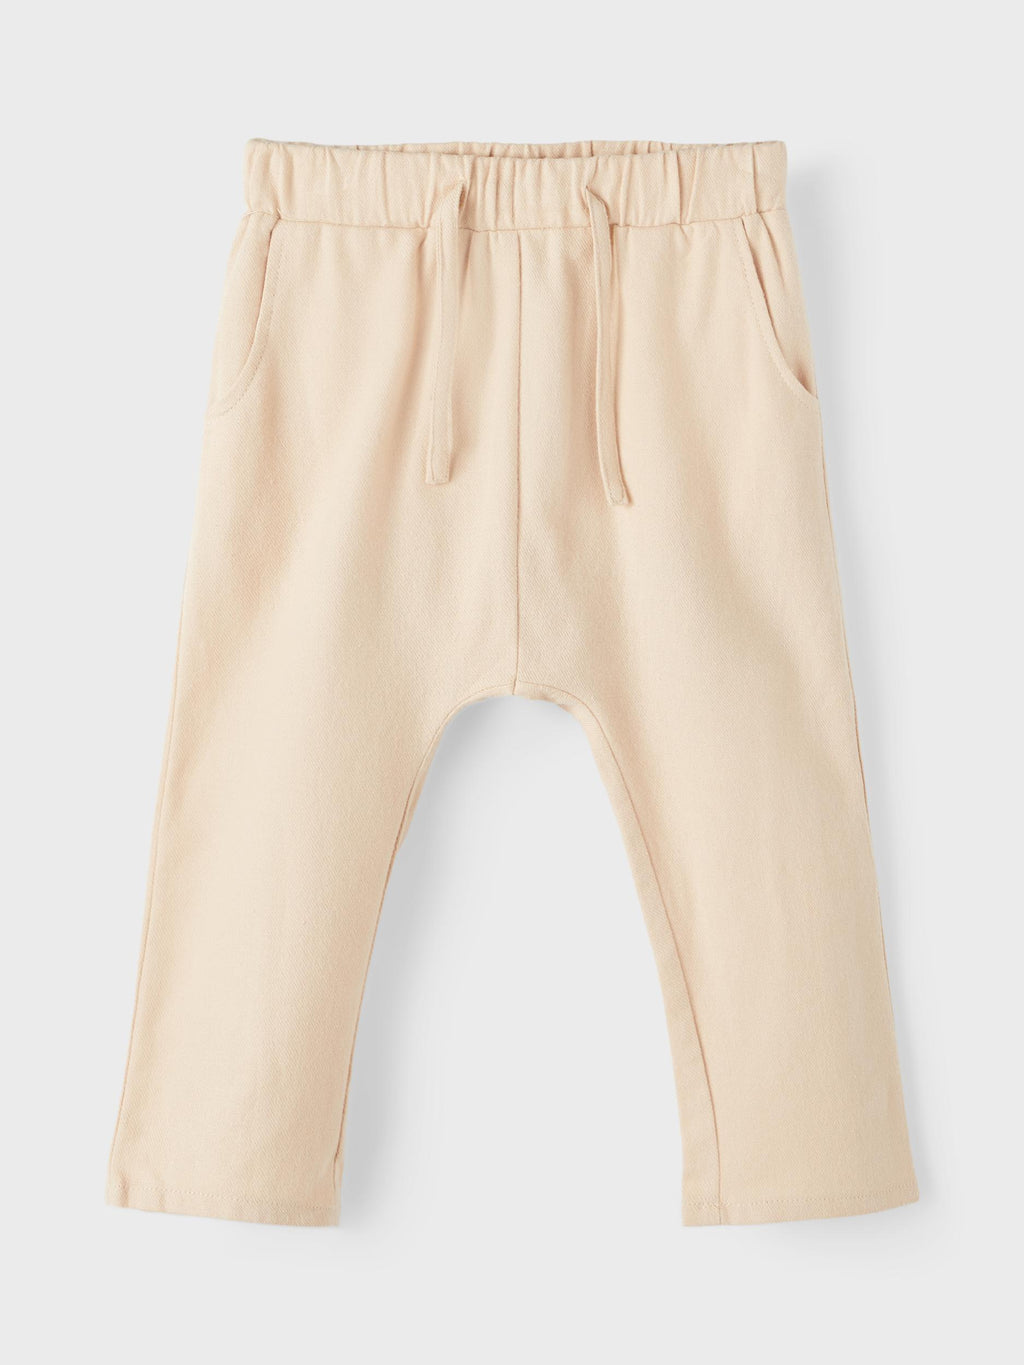 Lil Atelier Hector Ancle Pant